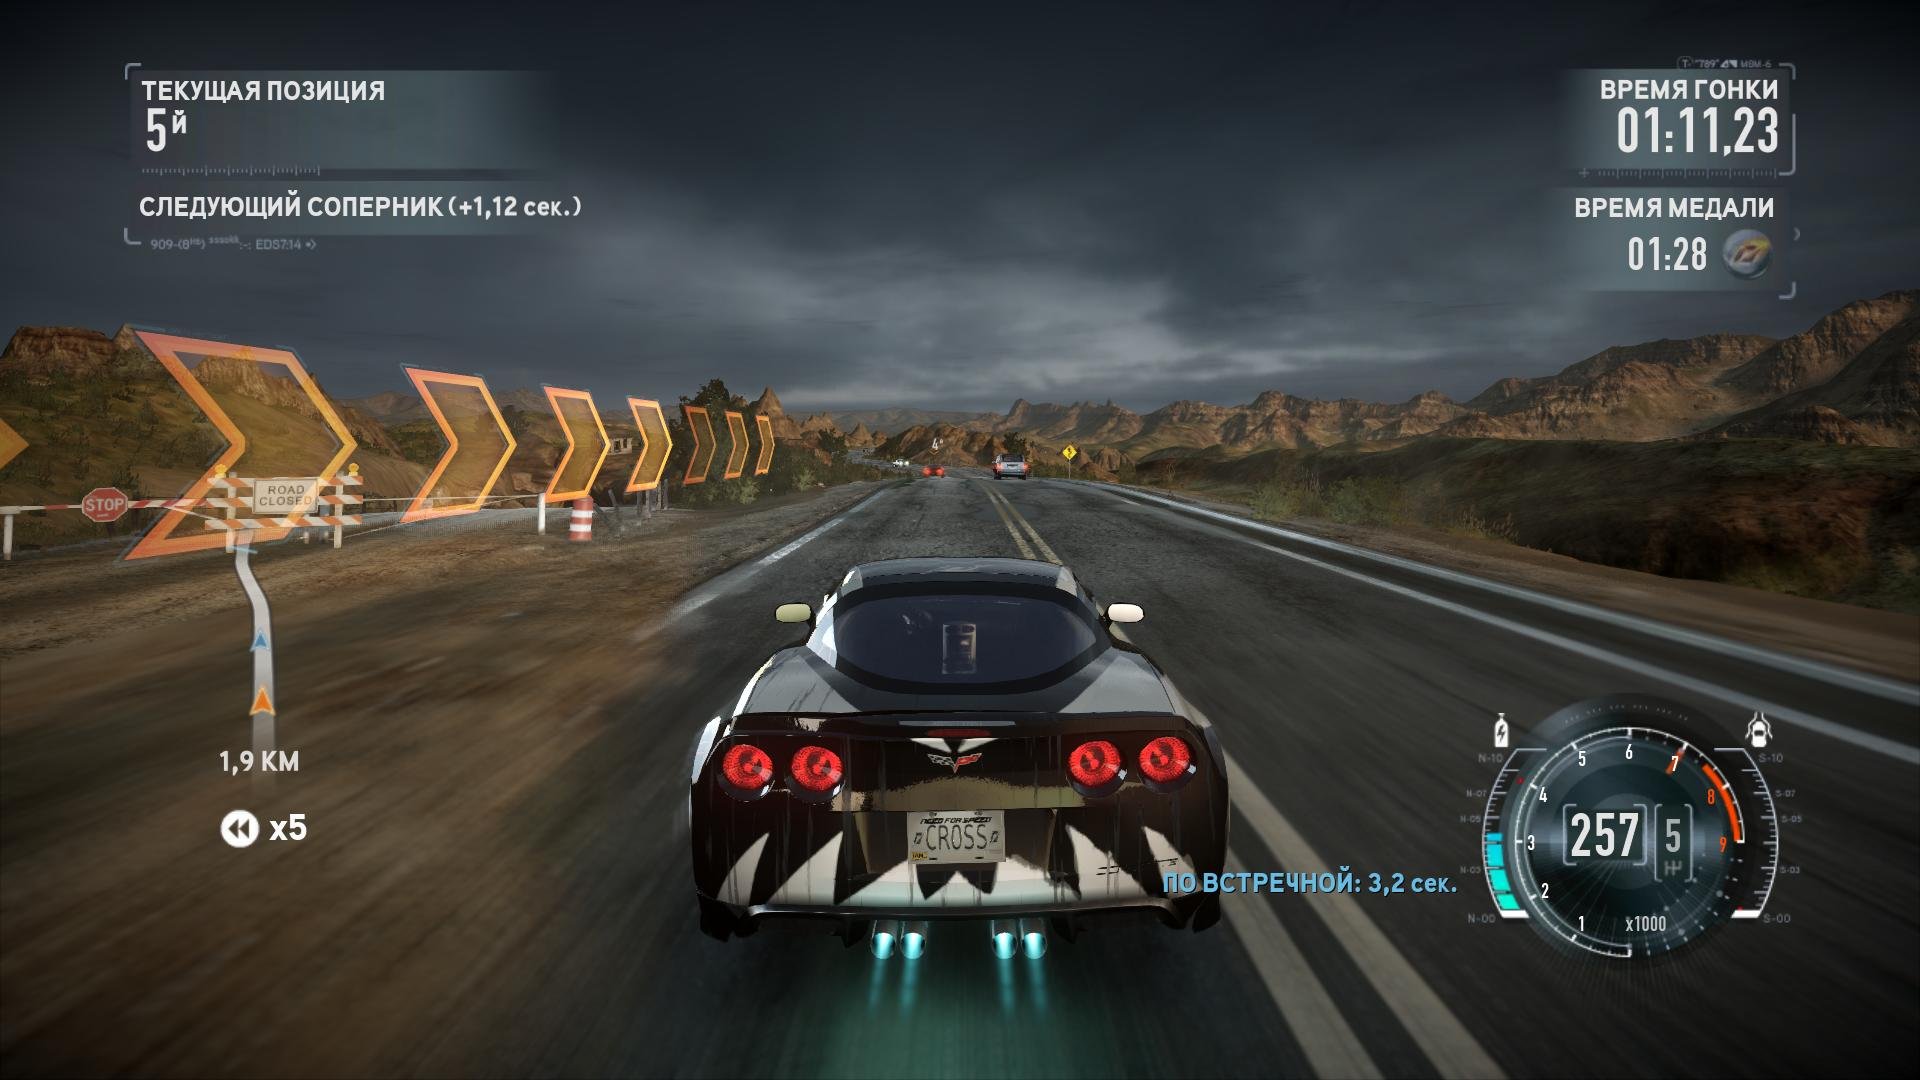 Скриншот 2 к игре Need for Speed: The Run Limited Edition PC (2011) RePack от Decepticon